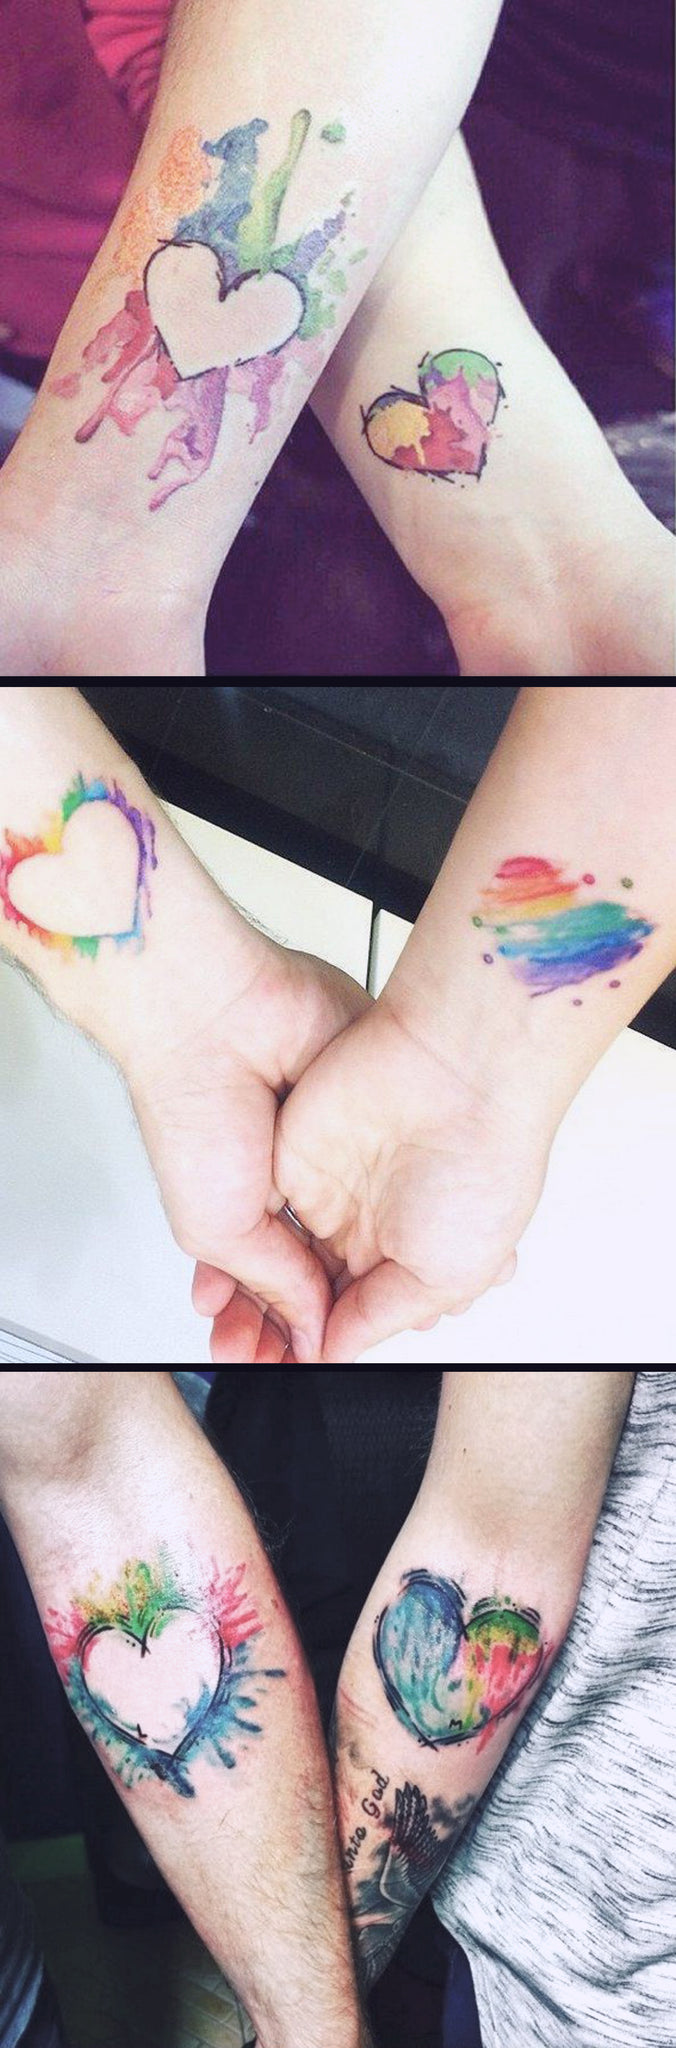 Matching Watercolor Heart Tattoo Ideas - Small Rainbow Soul Wrist Tatouage for Couples, Bestfriends, Sister for 2 - www.MyBodiArt.com 